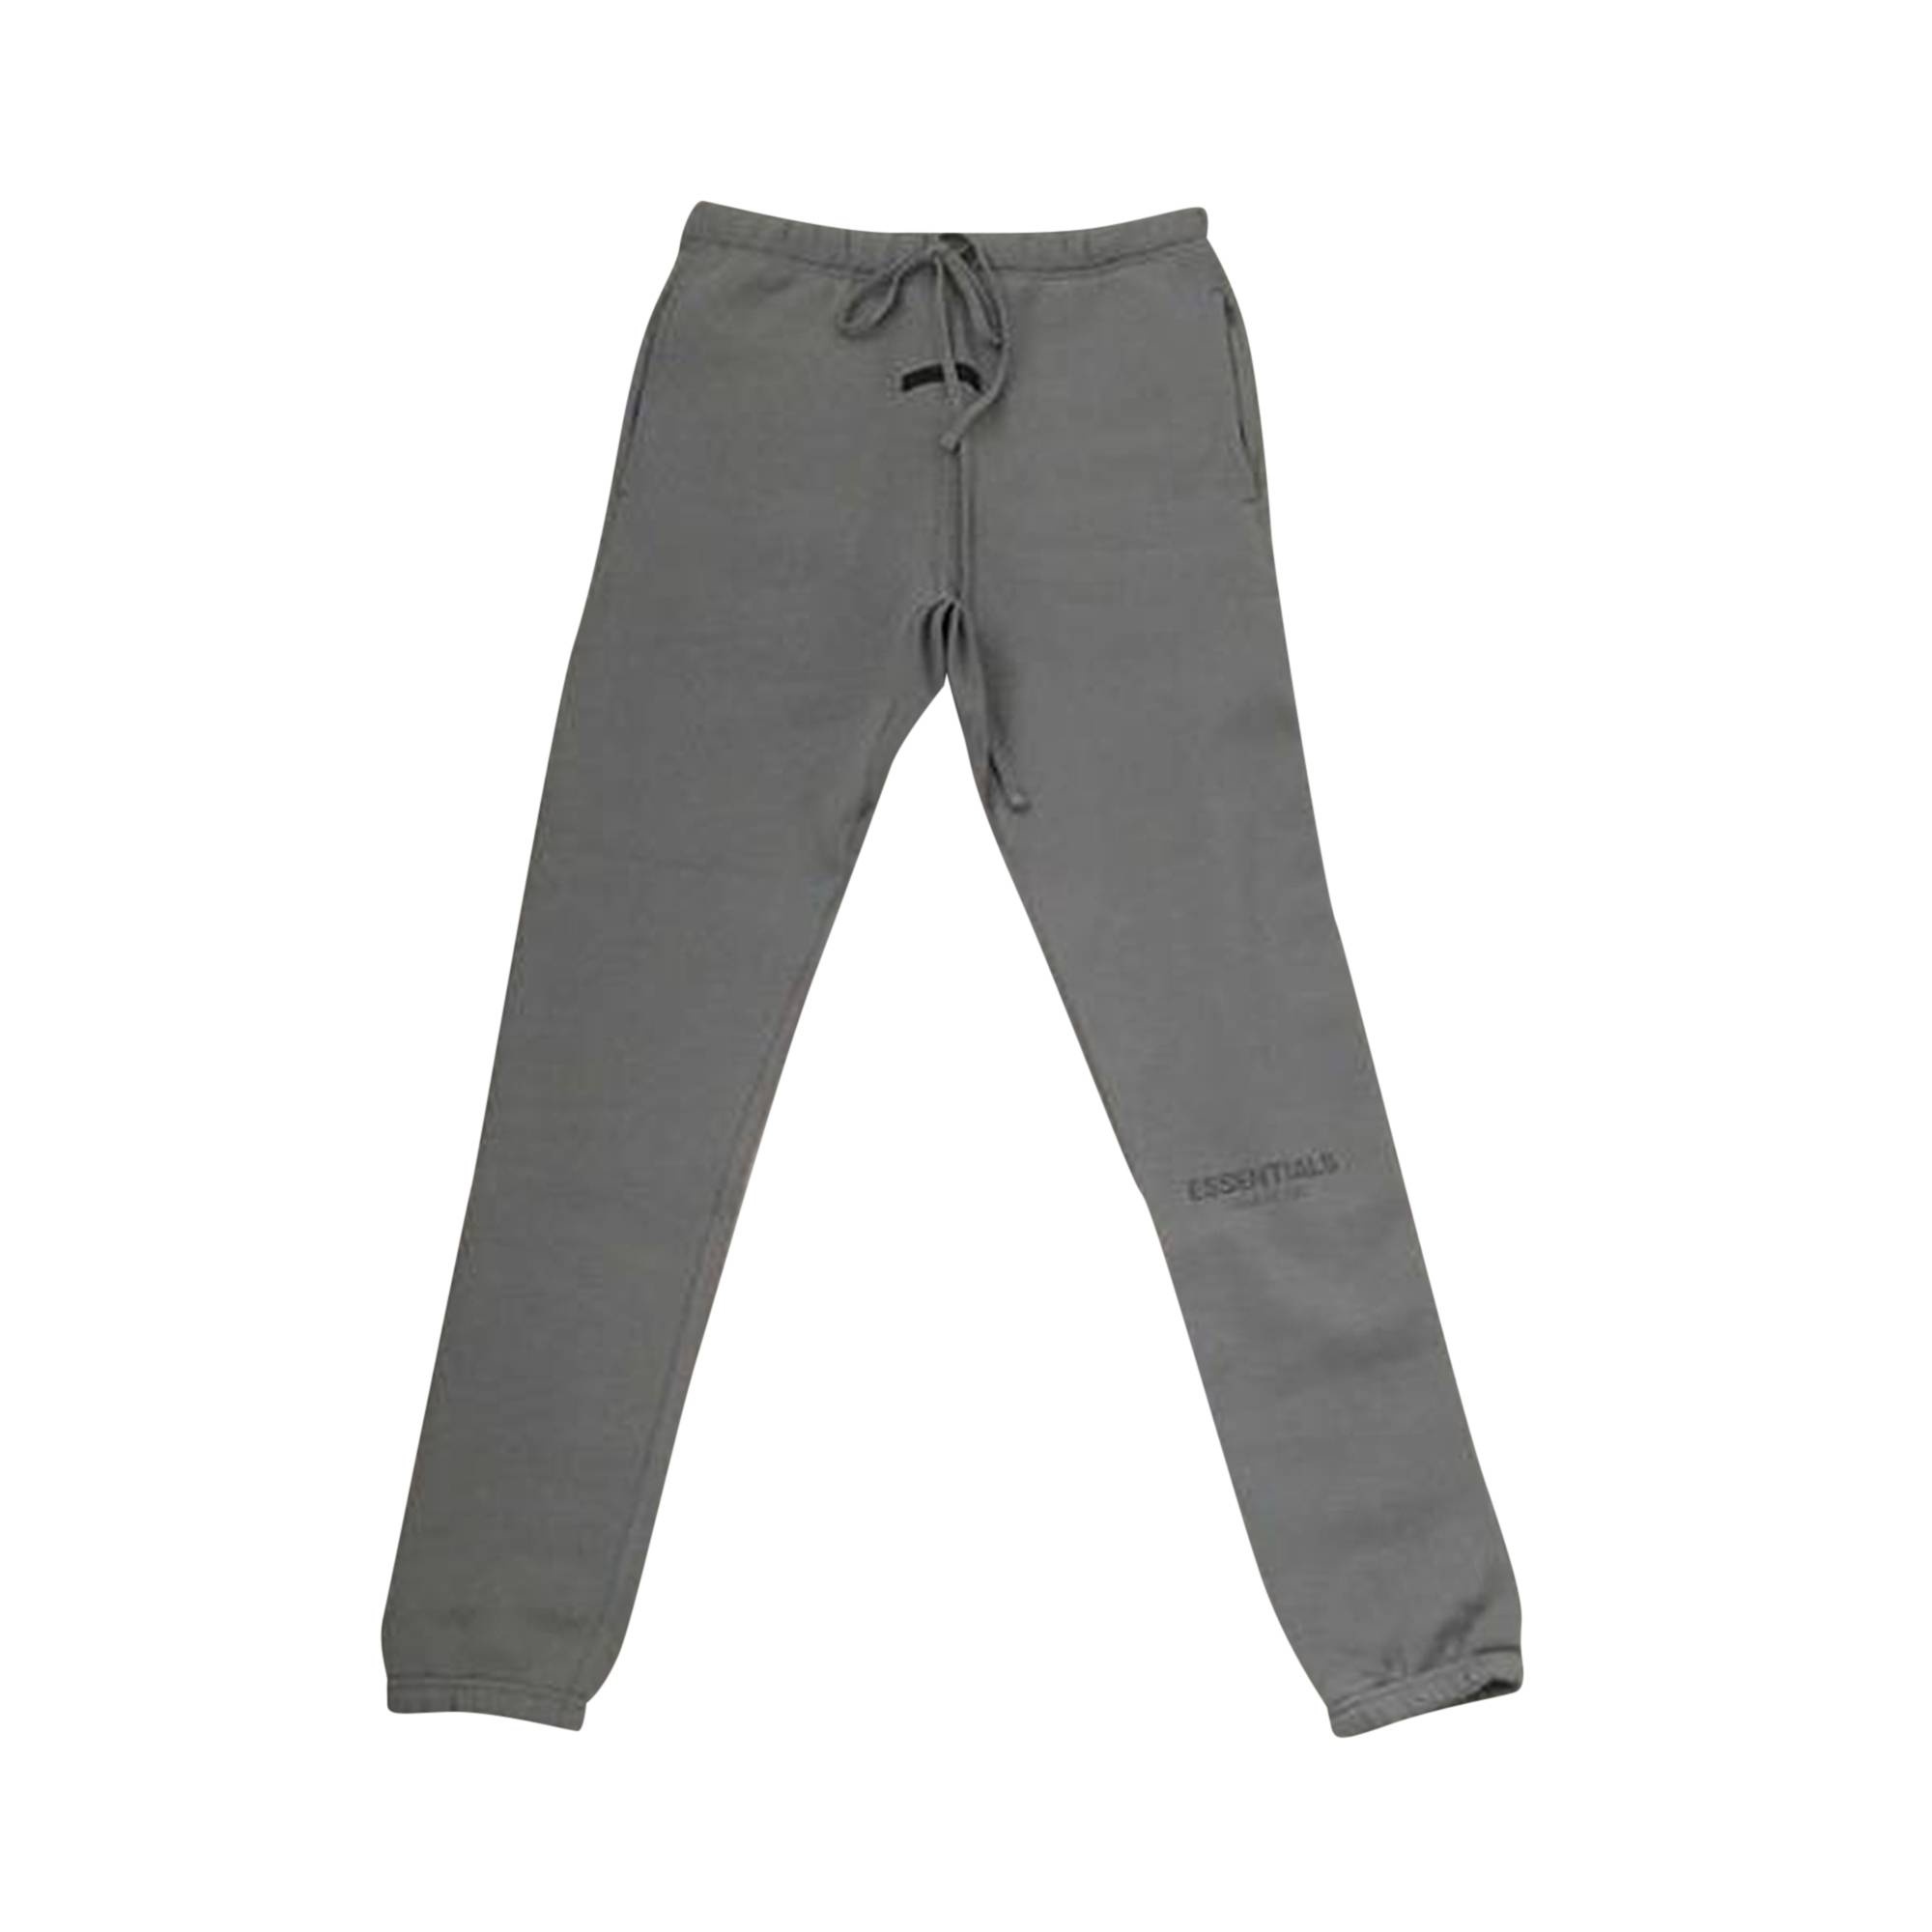 Fear of God Essentials Sweatpants 'Cement' - 1